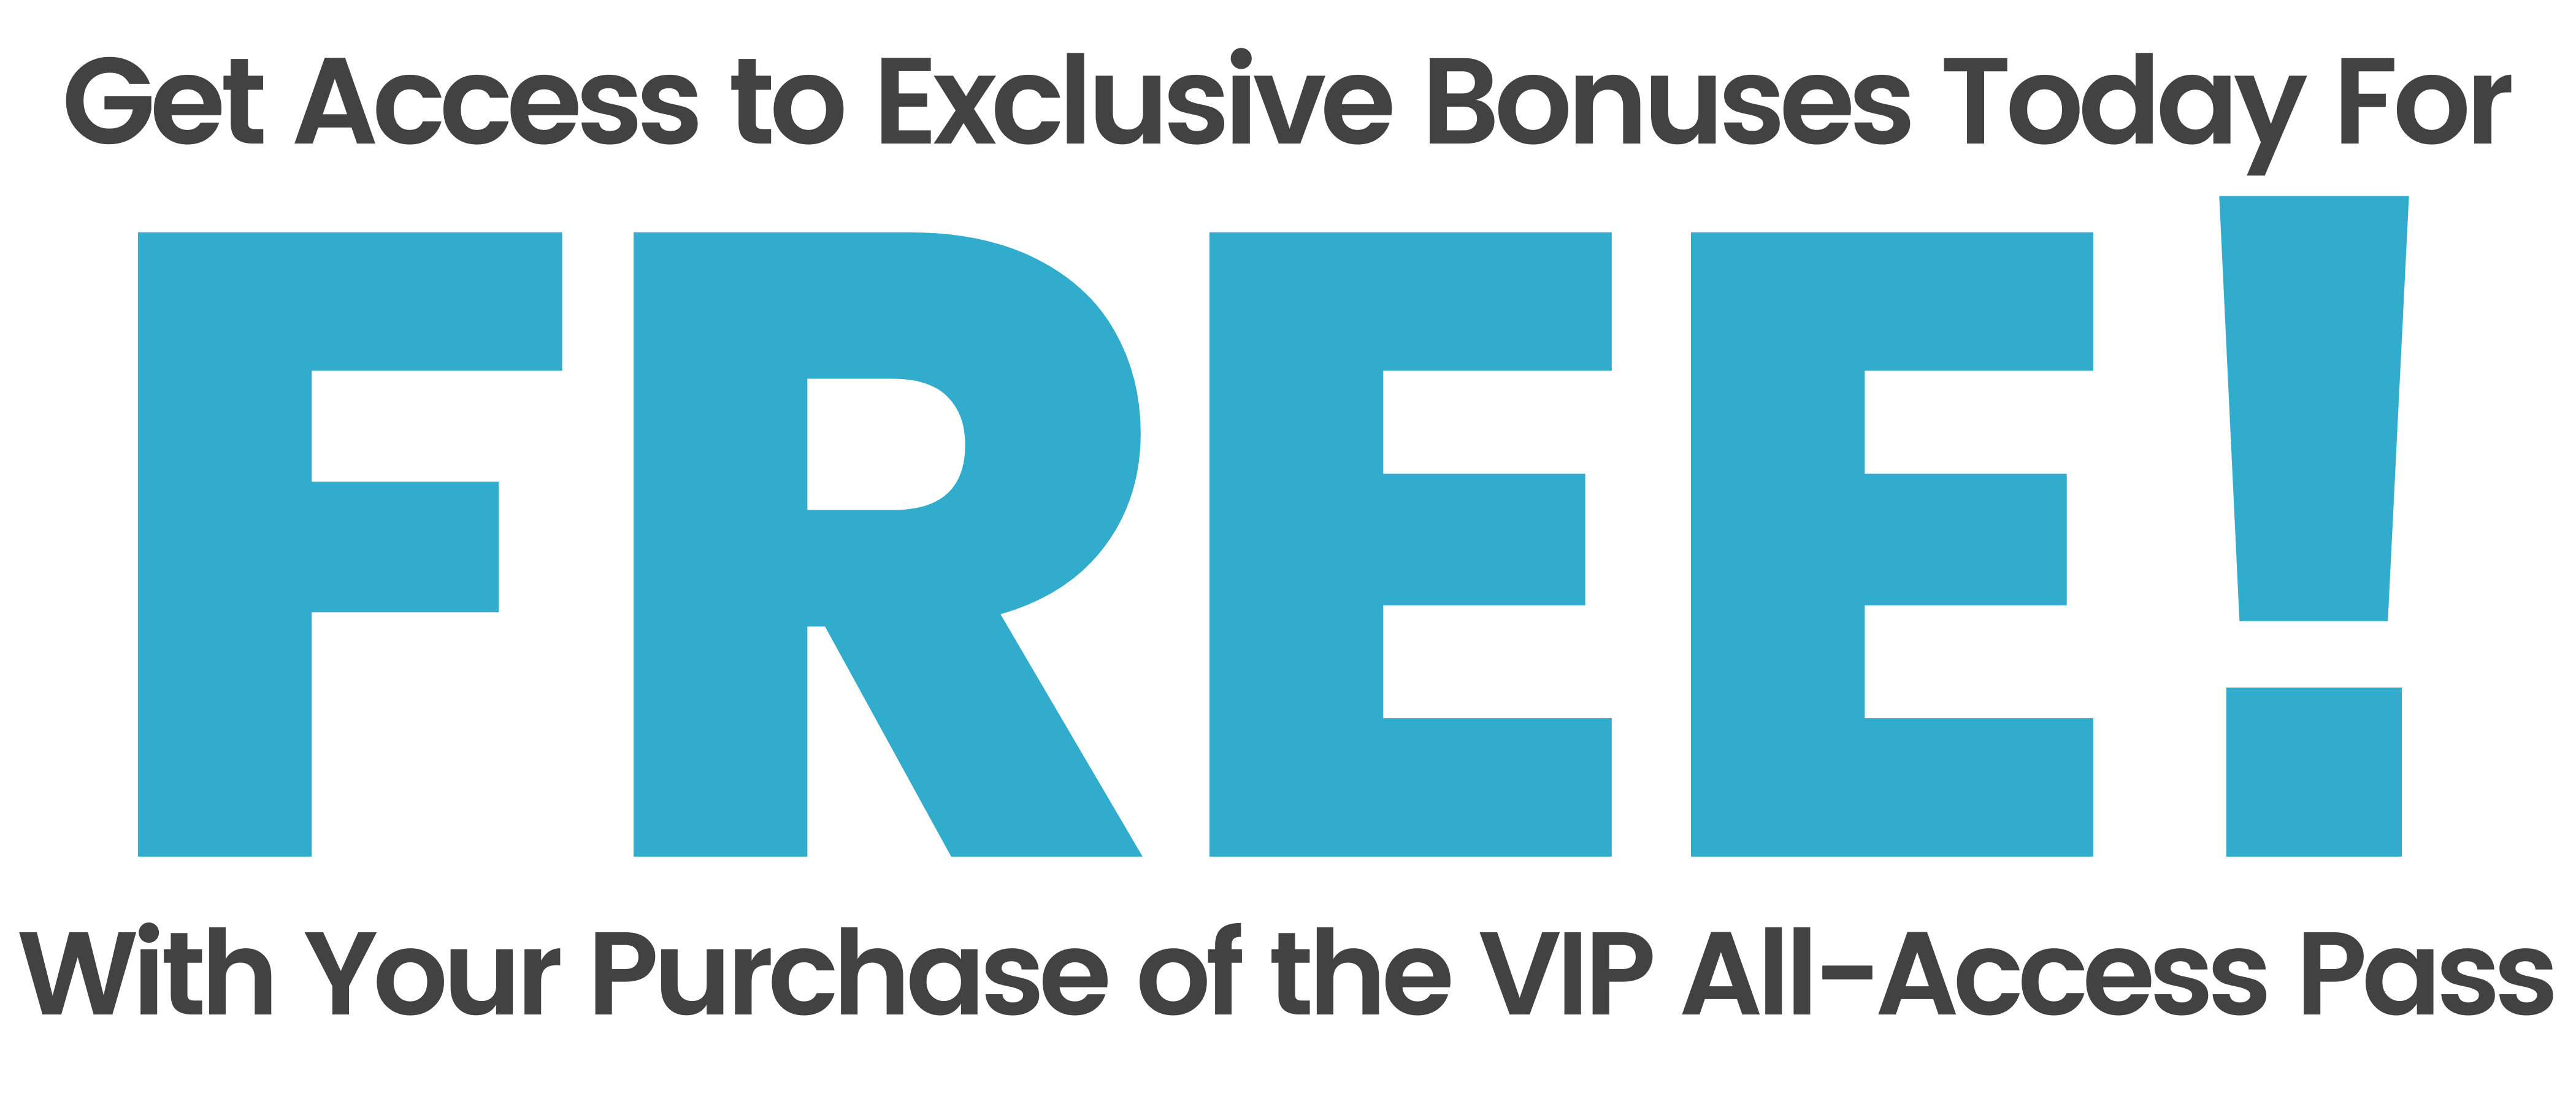 Get Access to Exclusive Bonuses Today for FREE With Your Purchase of the VIP All-Access Pass